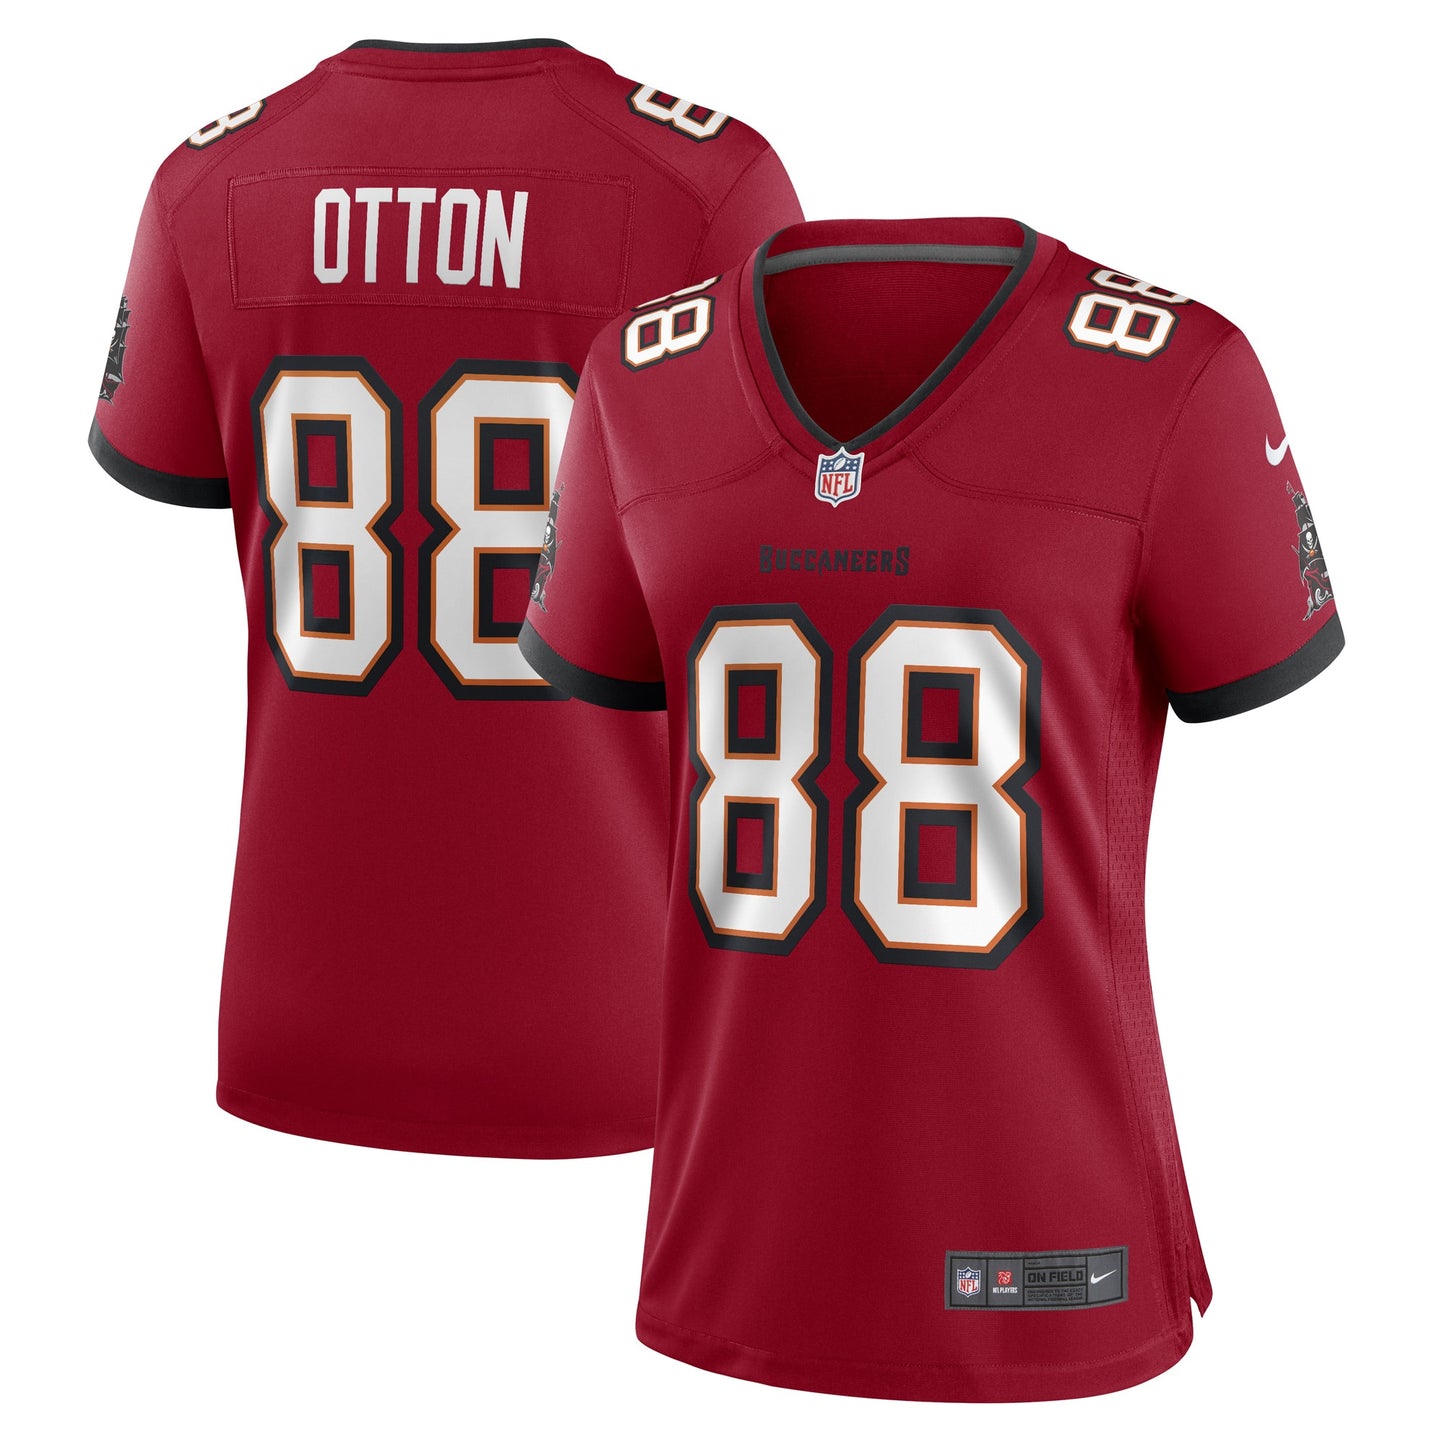 Cade Otton Tampa Bay Buccaneers Nike Women's Game Player Jersey - Red